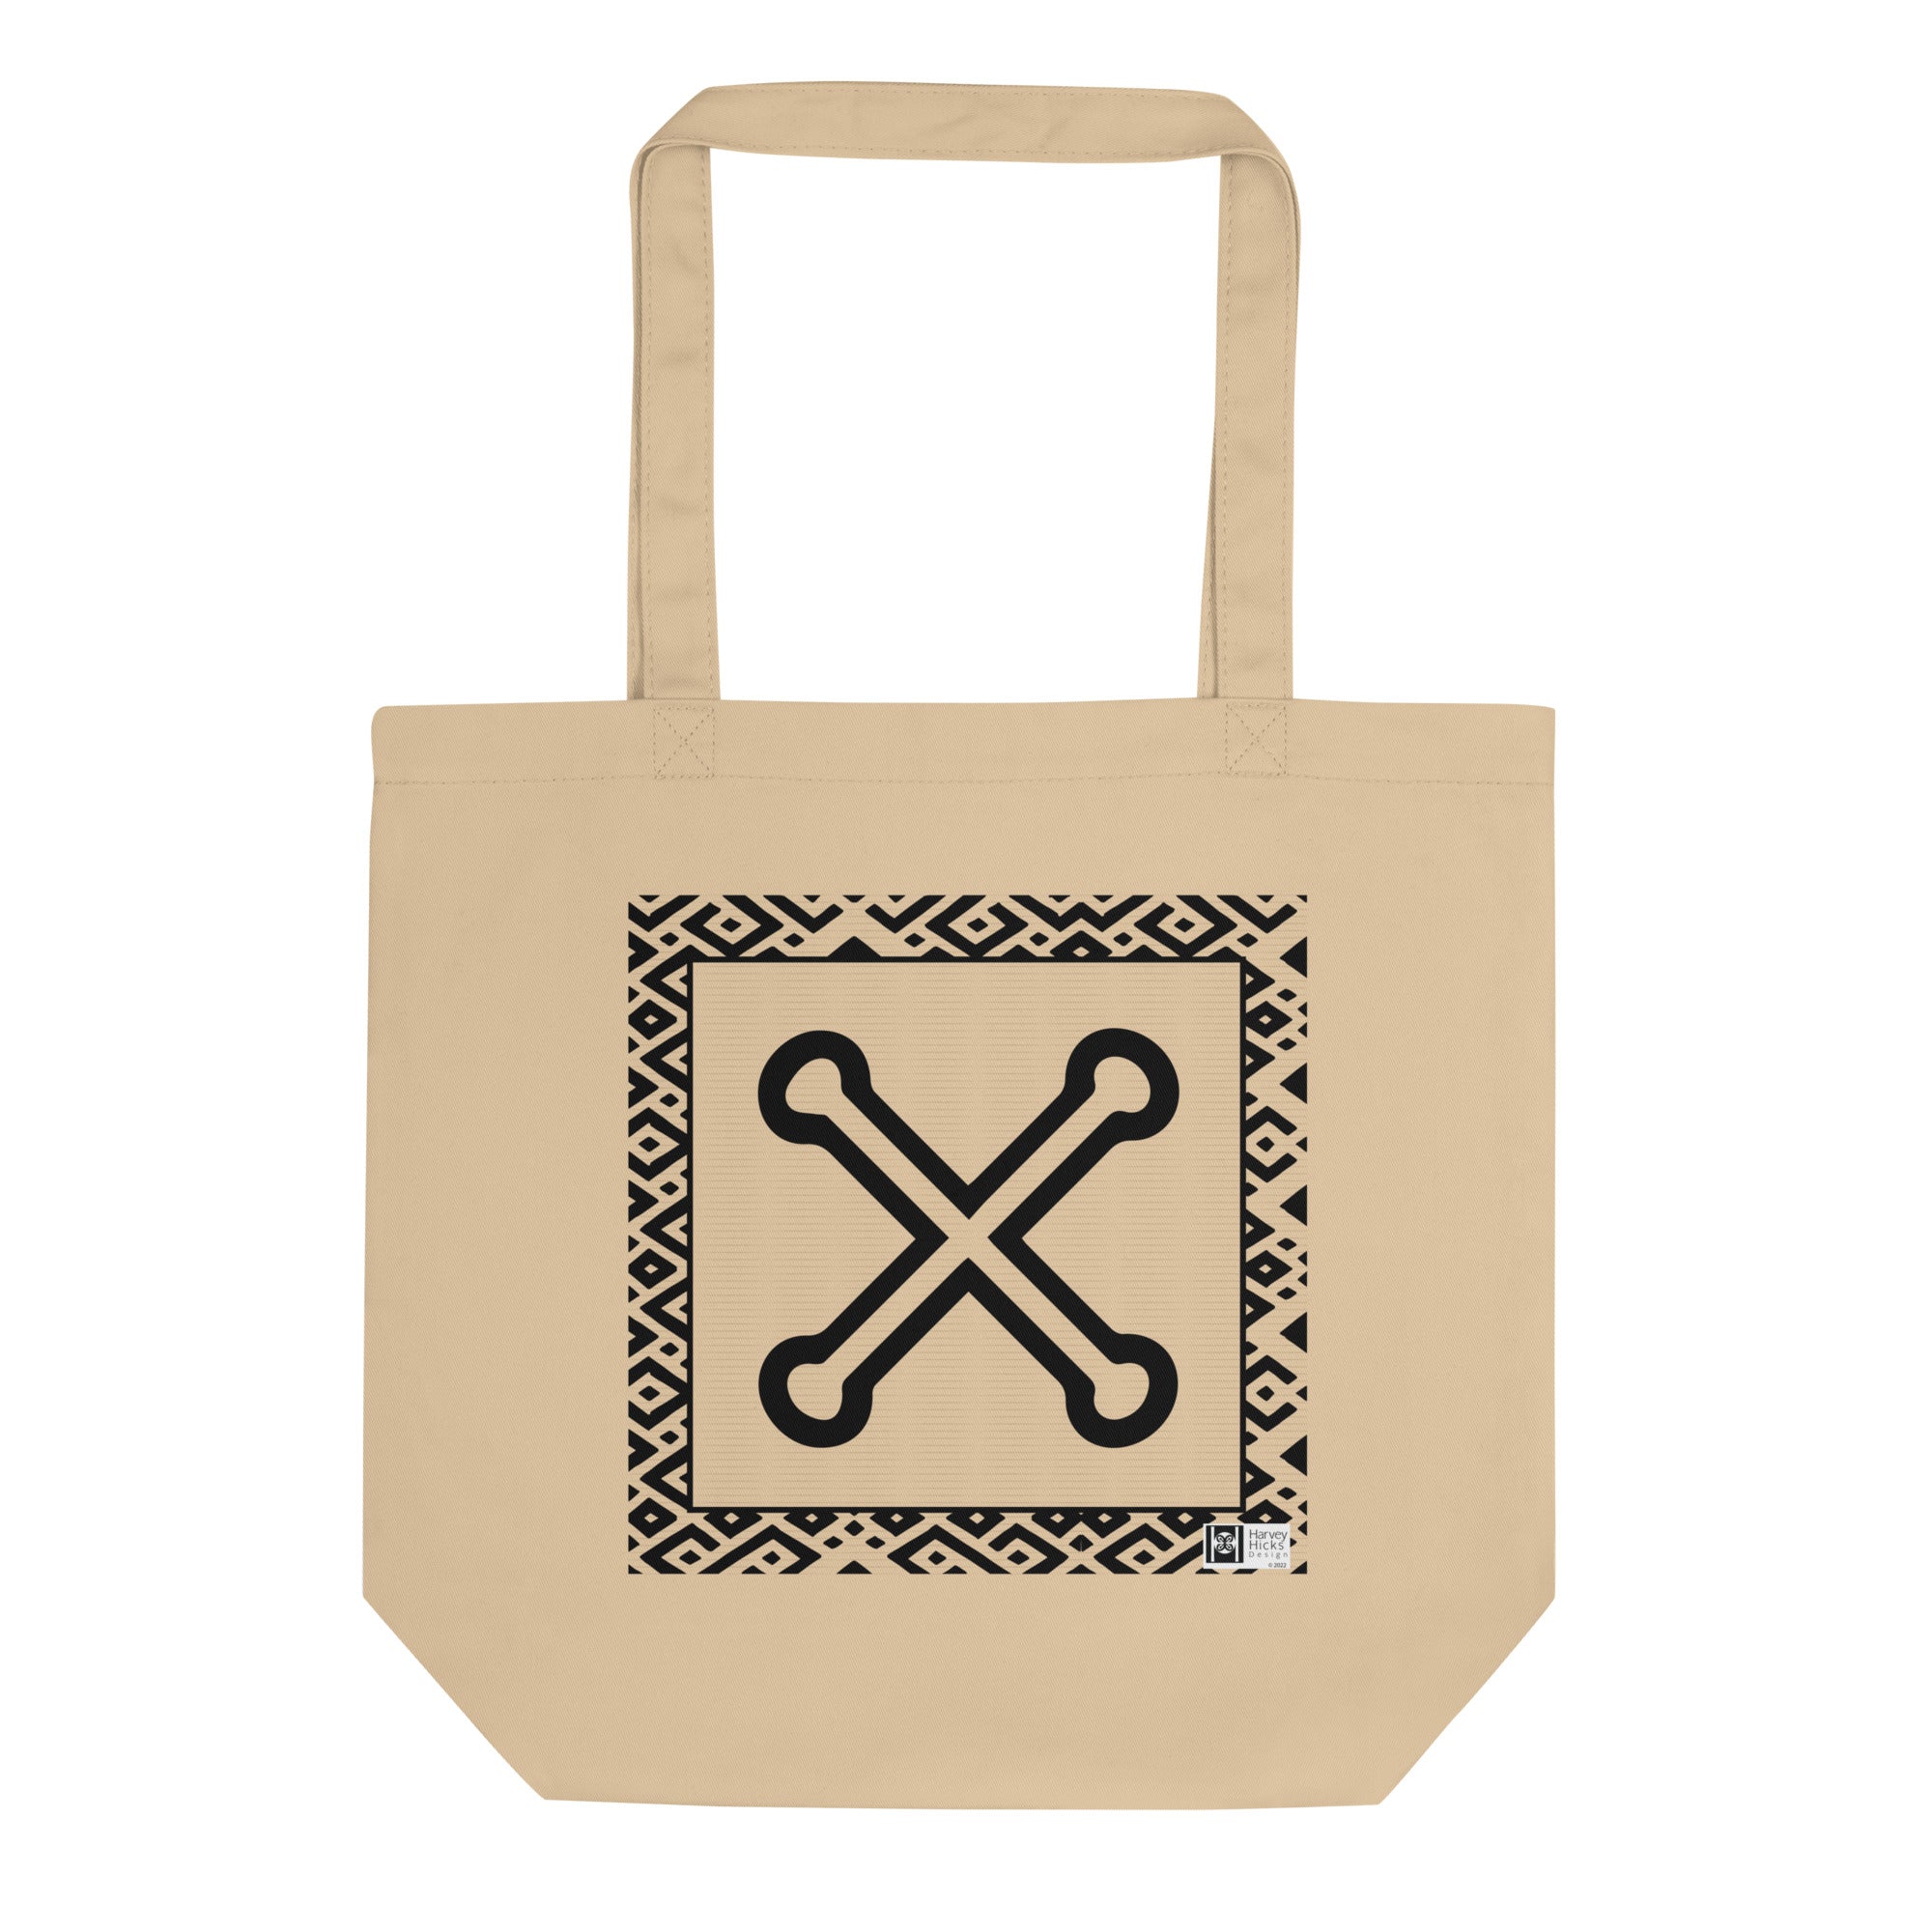 100% cotton Eco Tote Bag, featuring the Adinkra symbol for immortality, NO TEXT